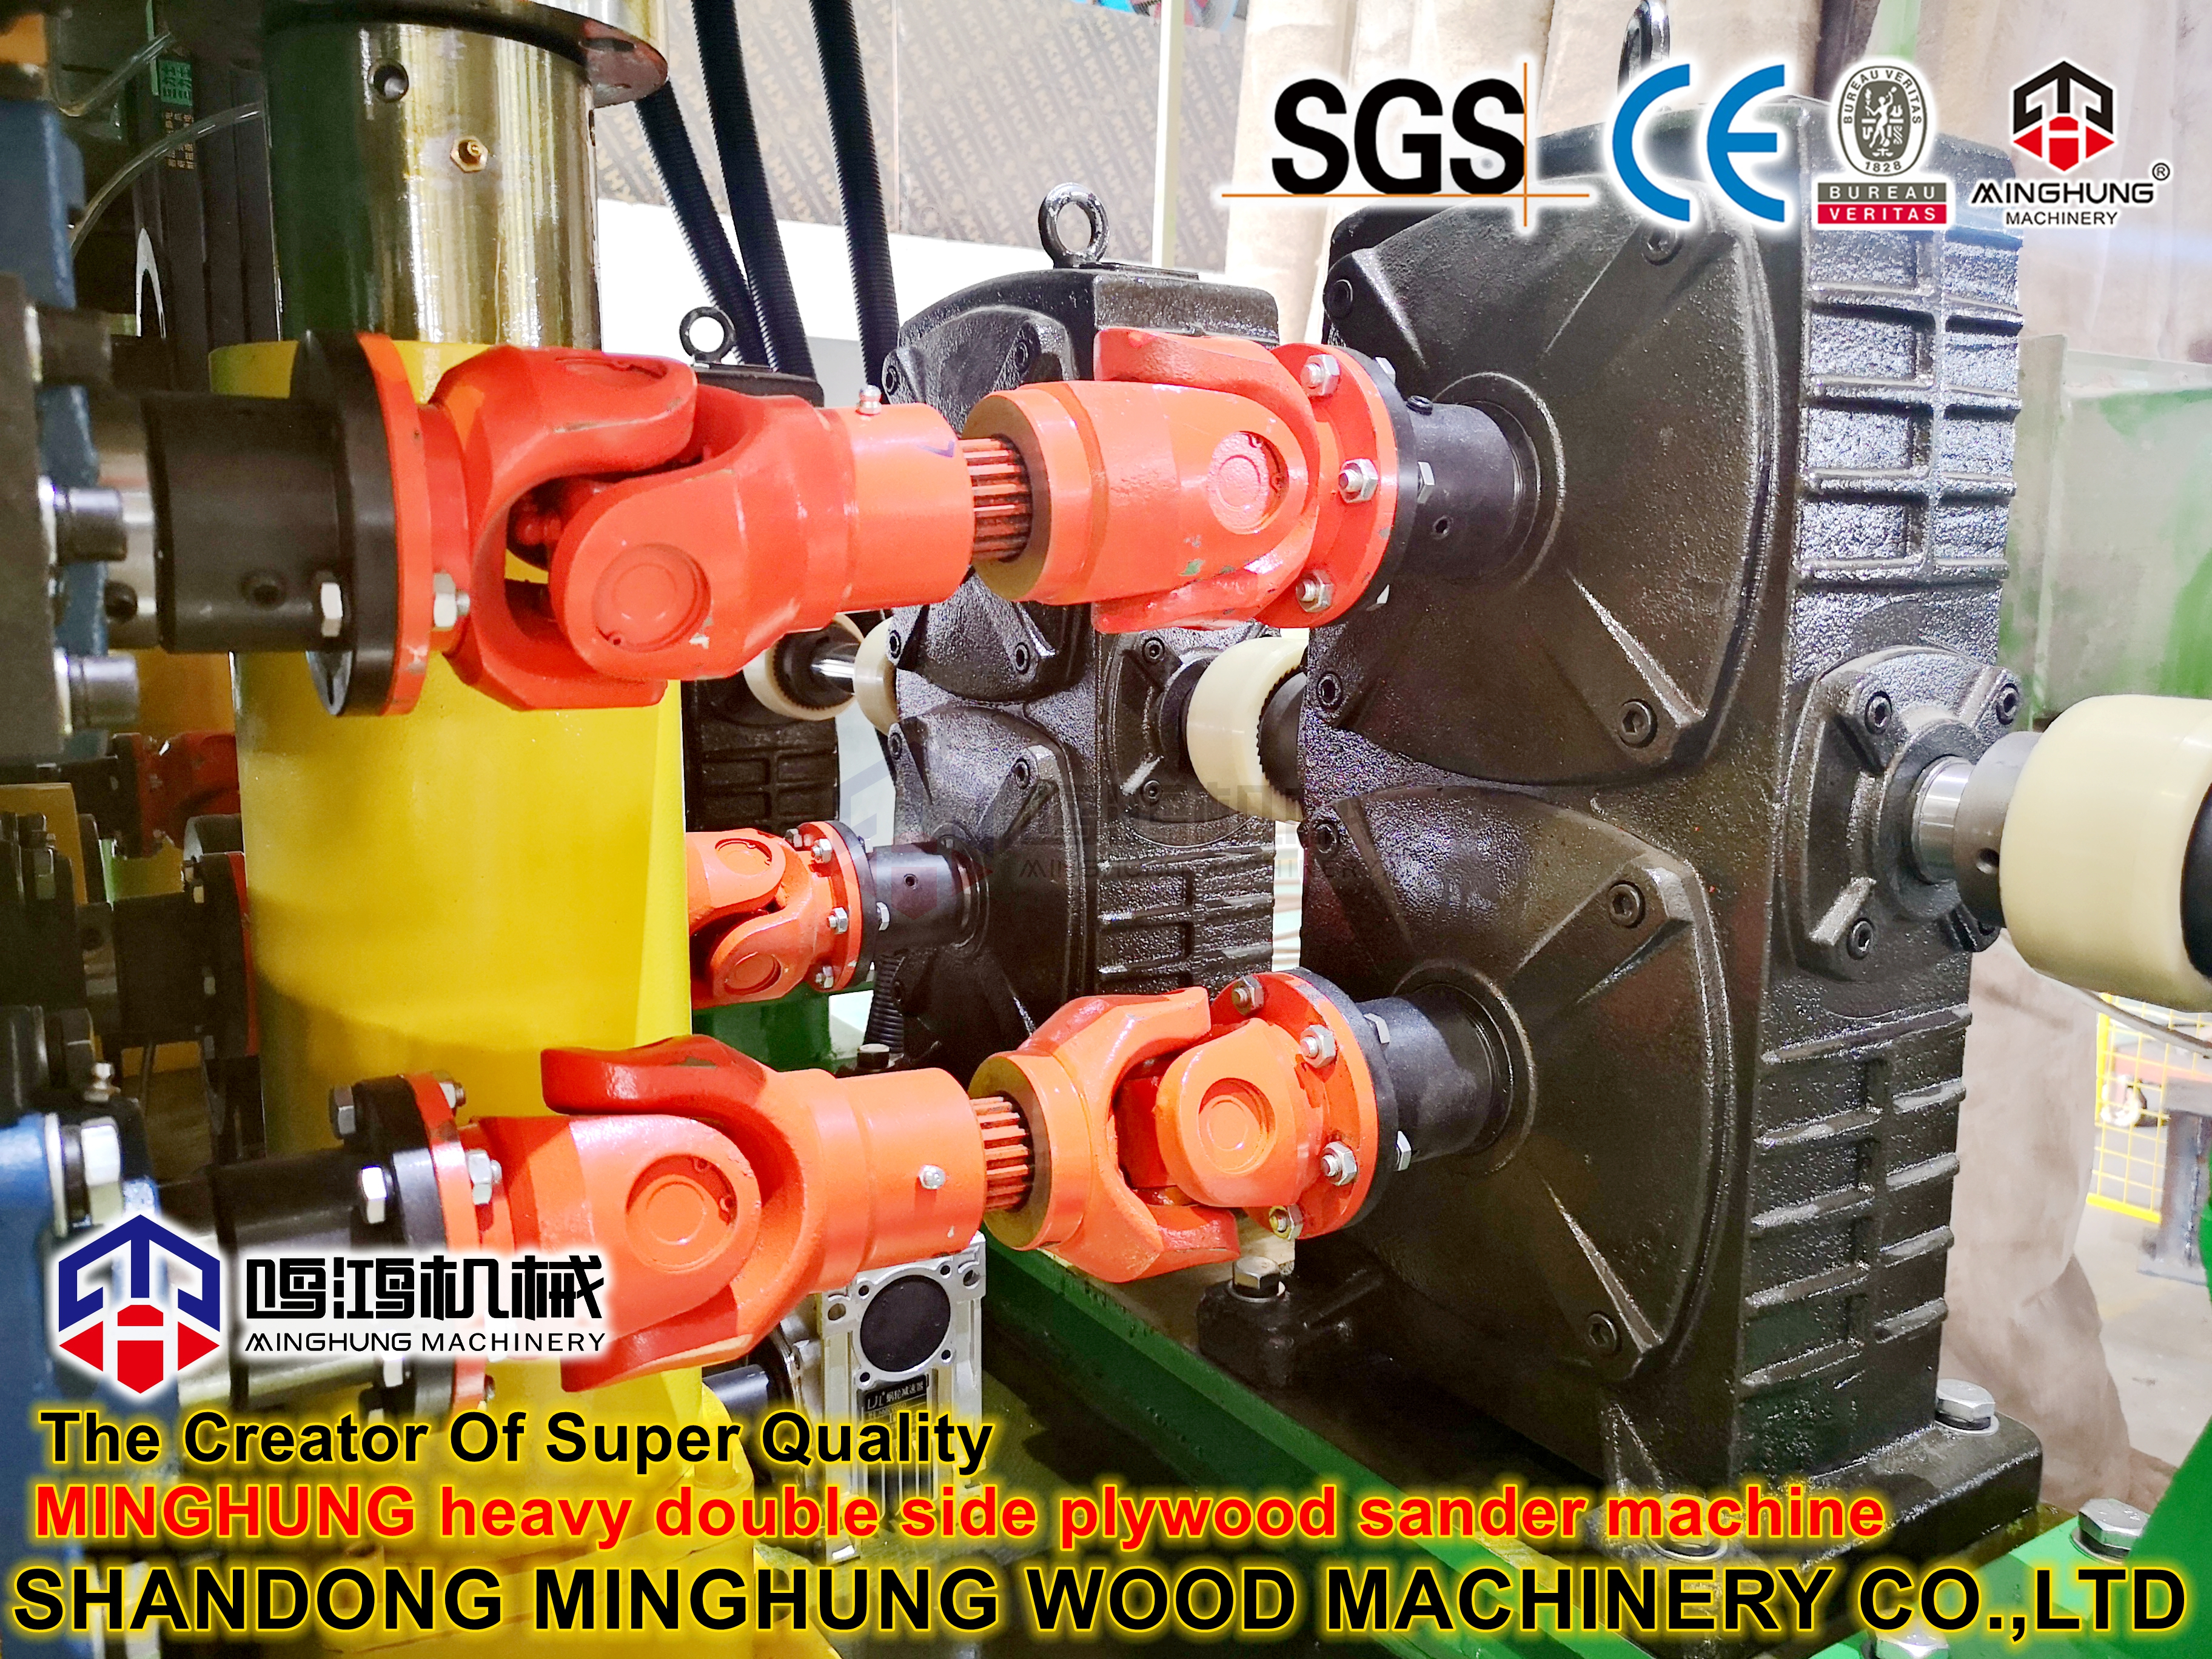 MINGHUNG heavy double side plywood sanding machine